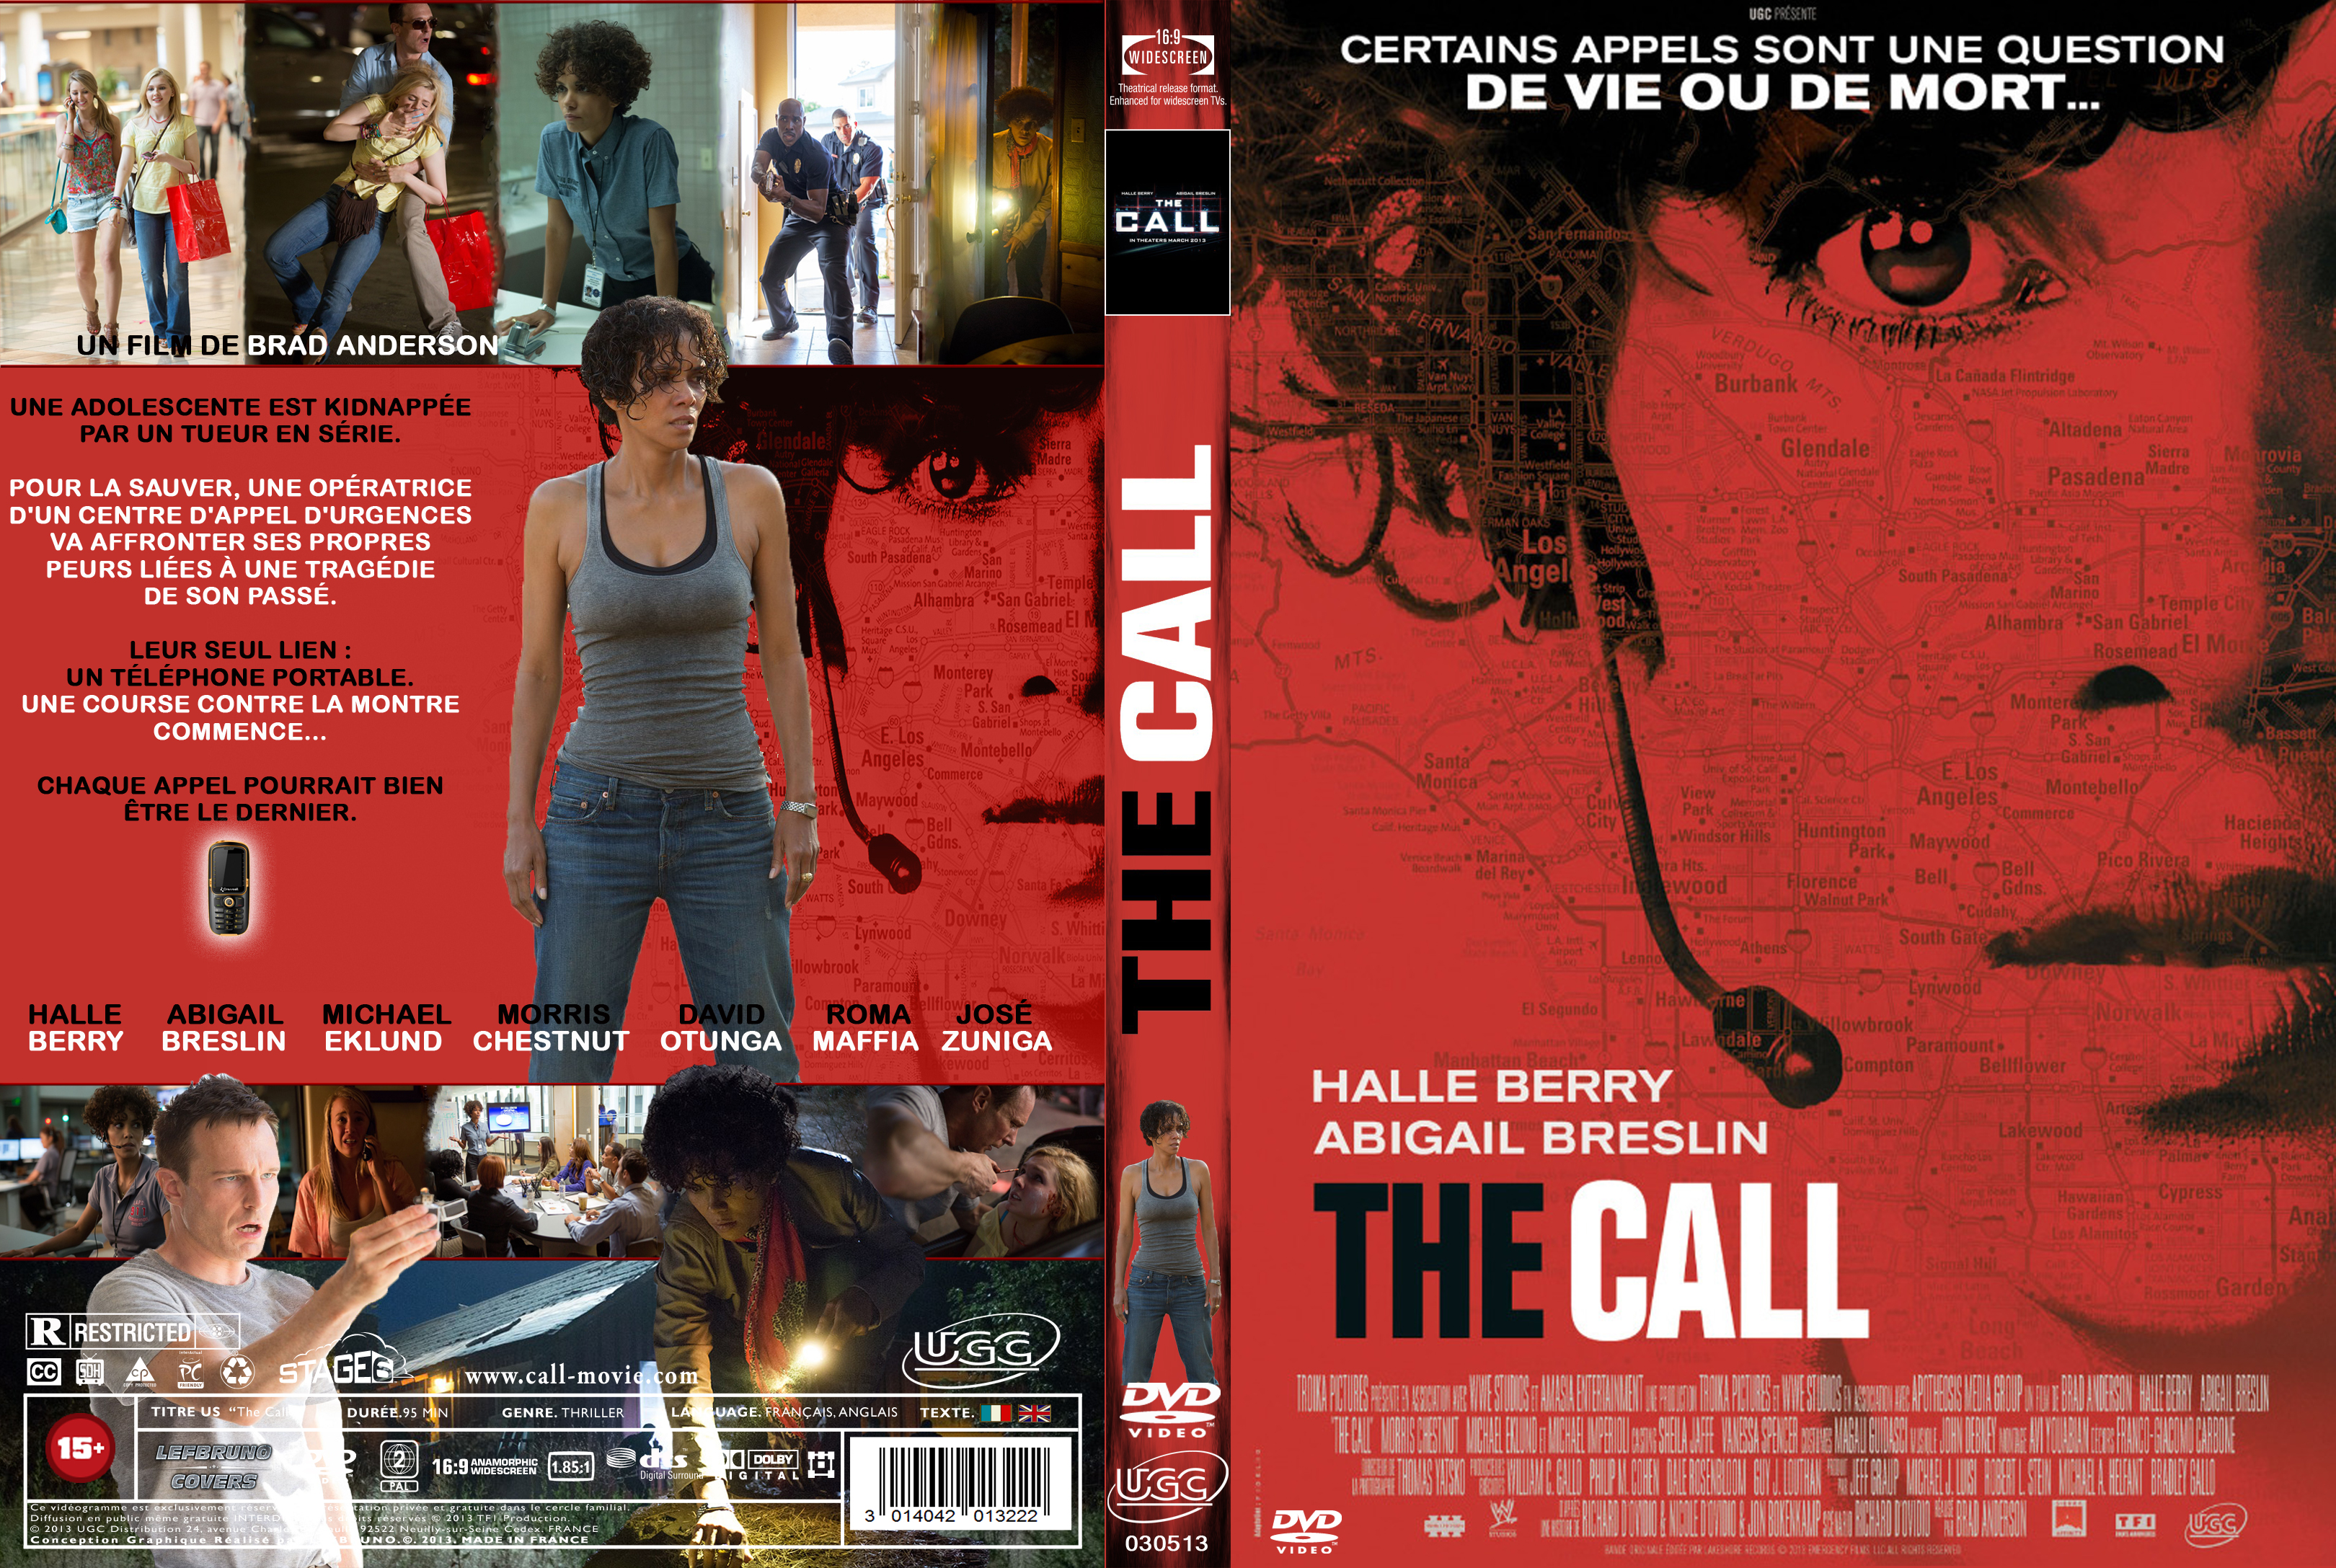 Jaquette DVD The Call custom